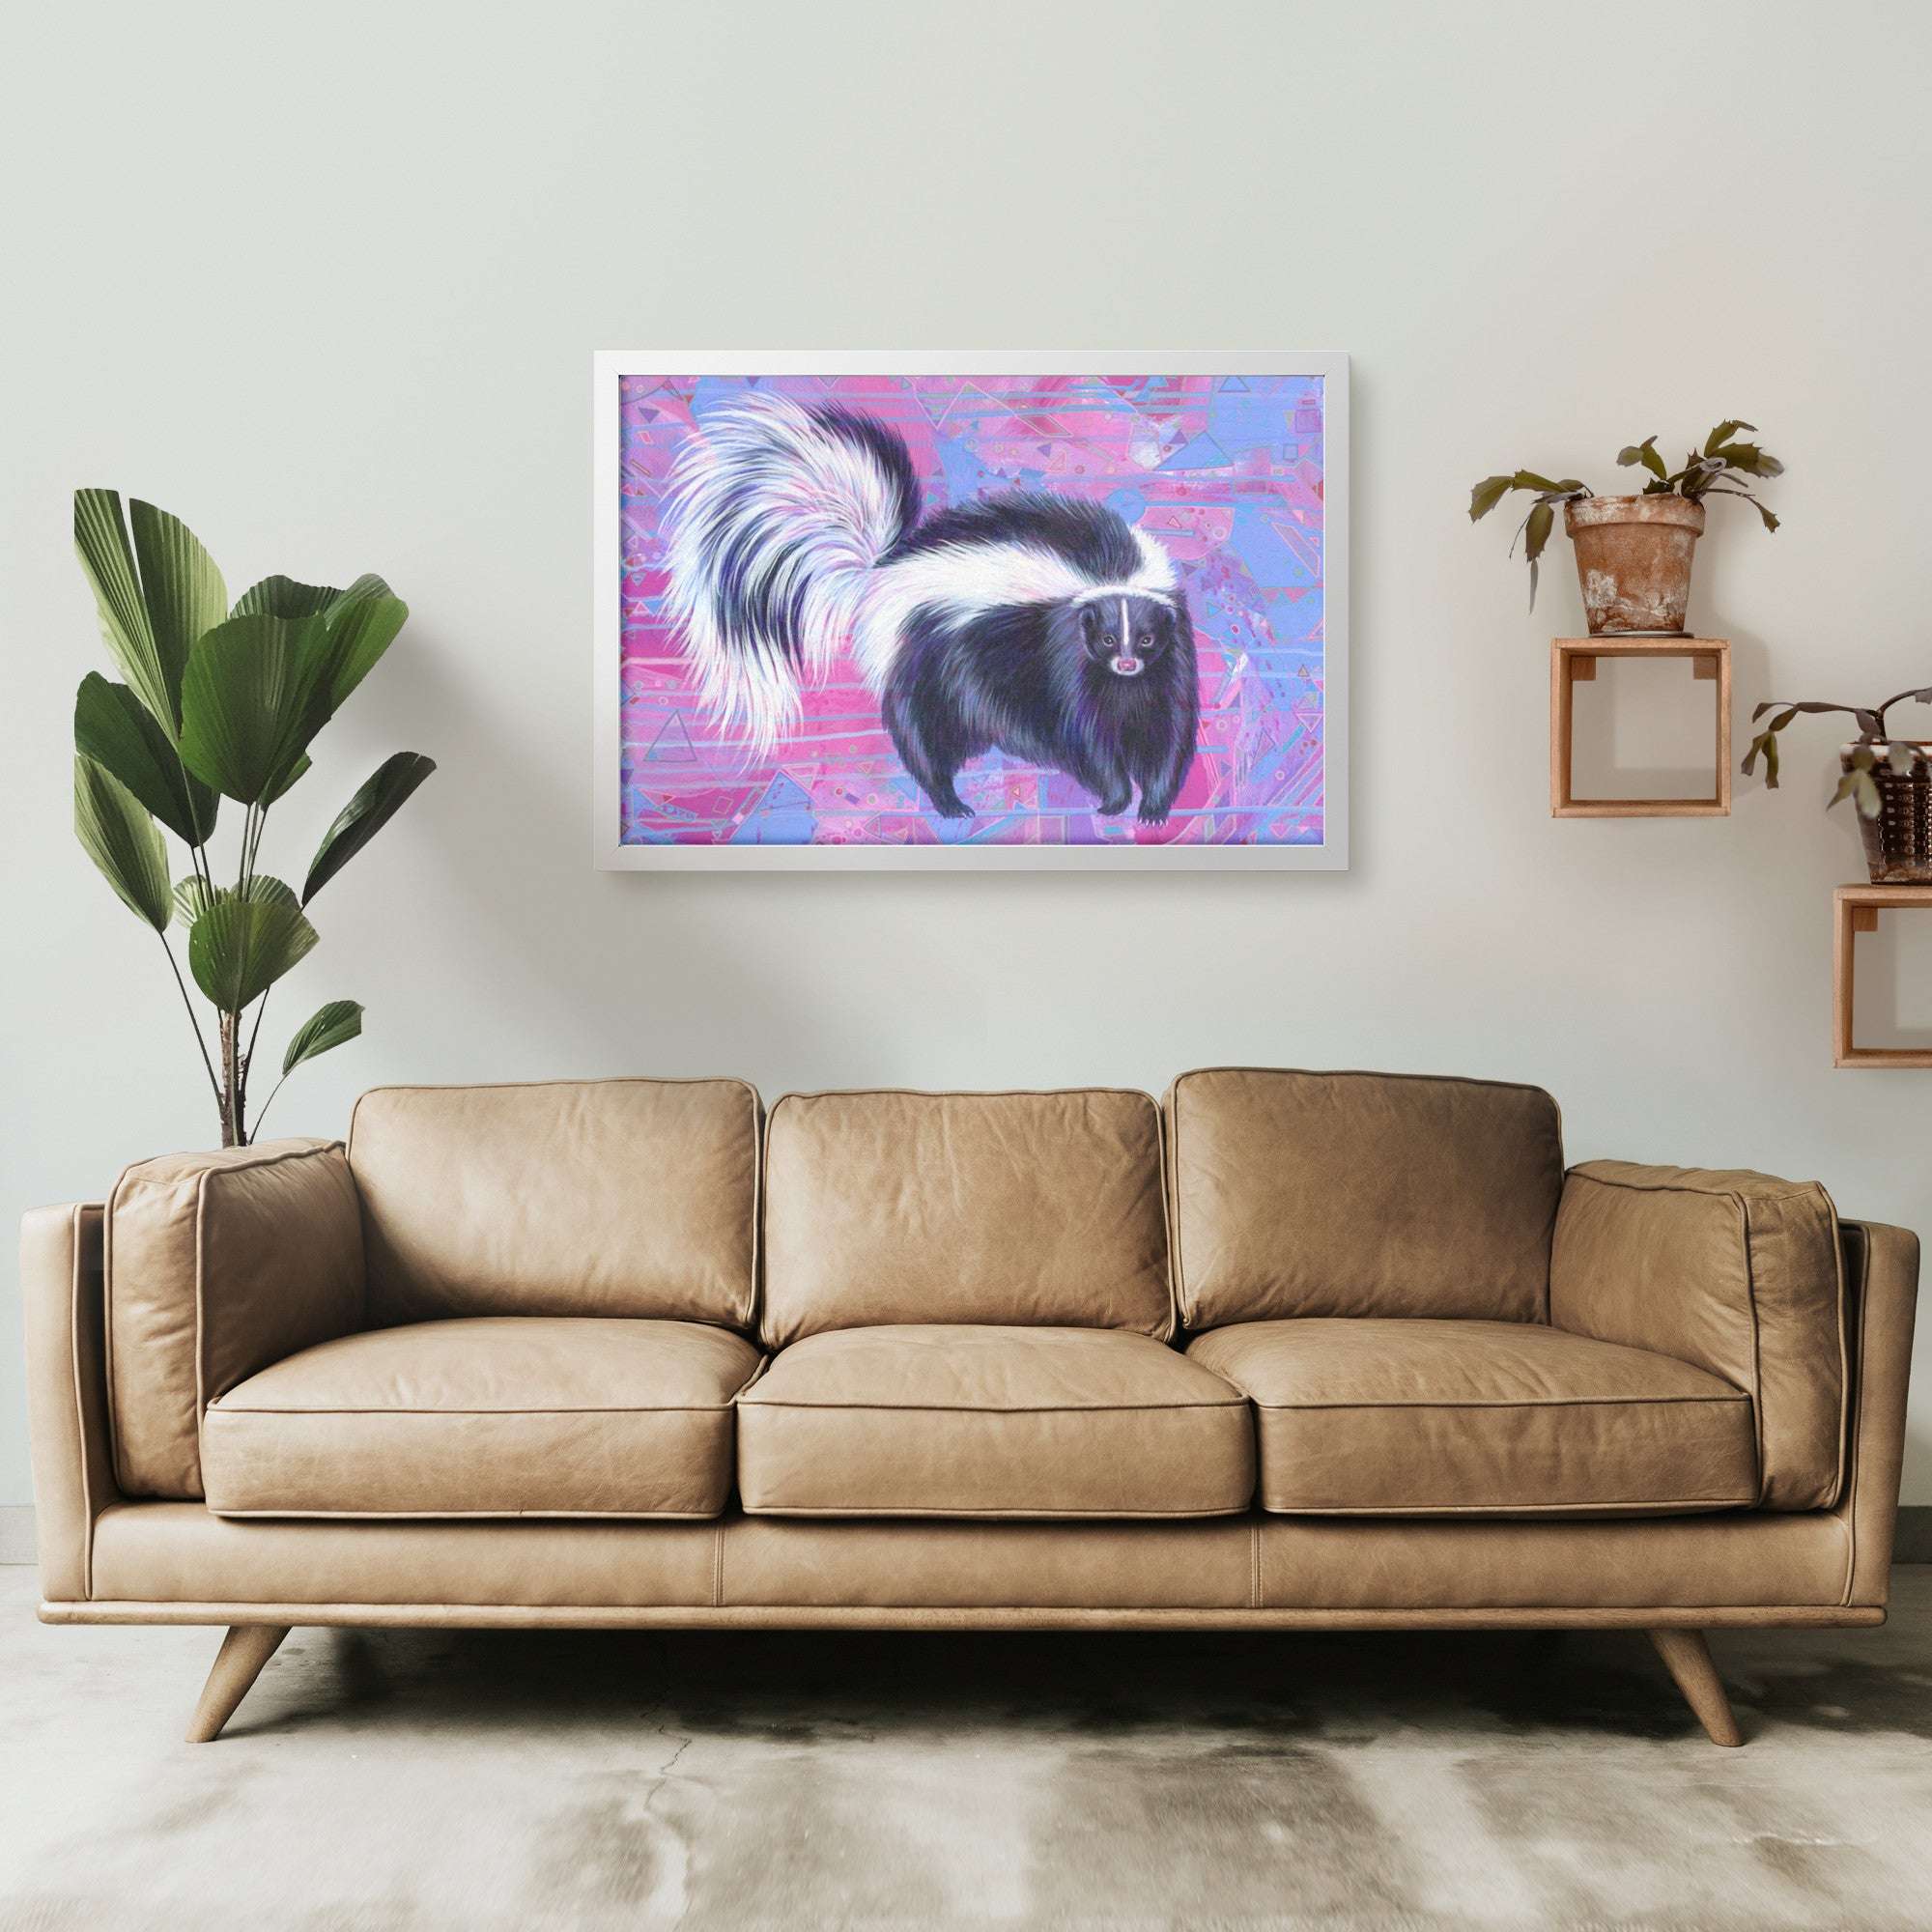 A modern living room featuring a Framed Skunk Art Print on the wall, with plants and shelves on either side.